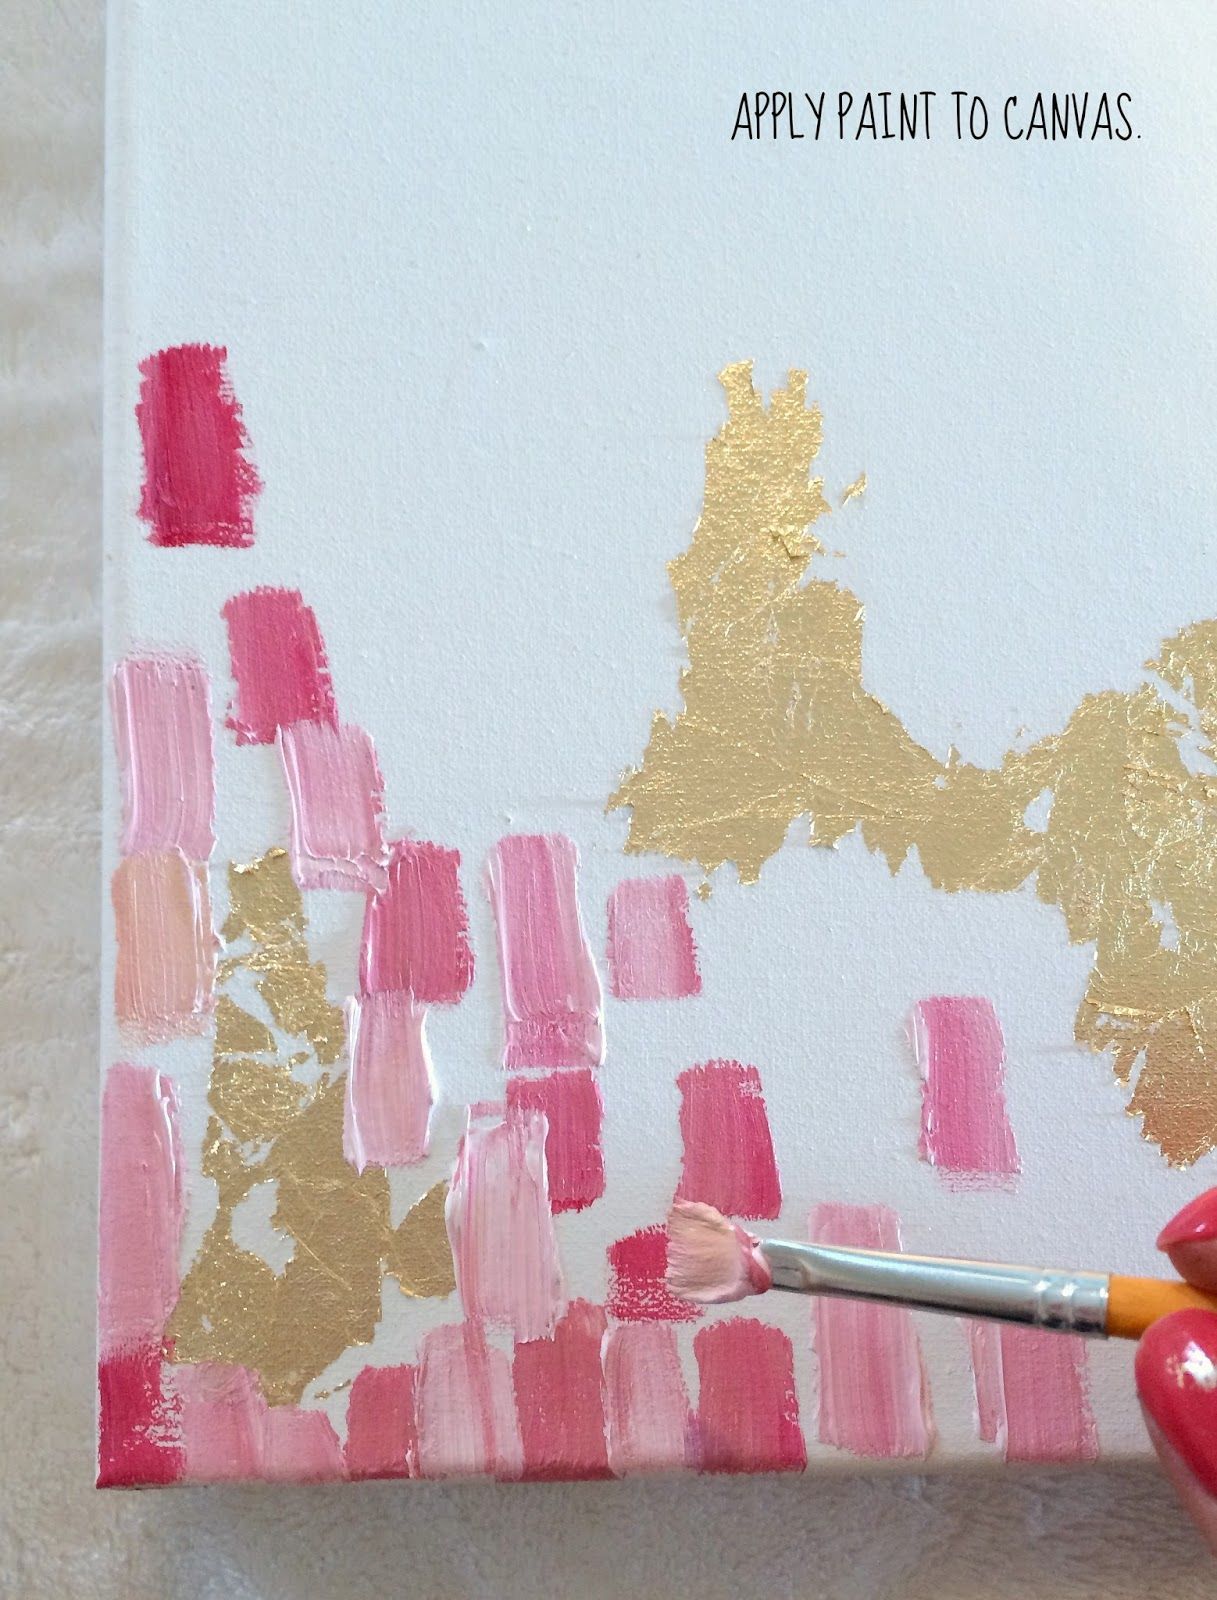 How To Make DIY Gold Leaf Abstract Art. Maybe this will help me make an imitation of that expensive painting I’ve been coveting